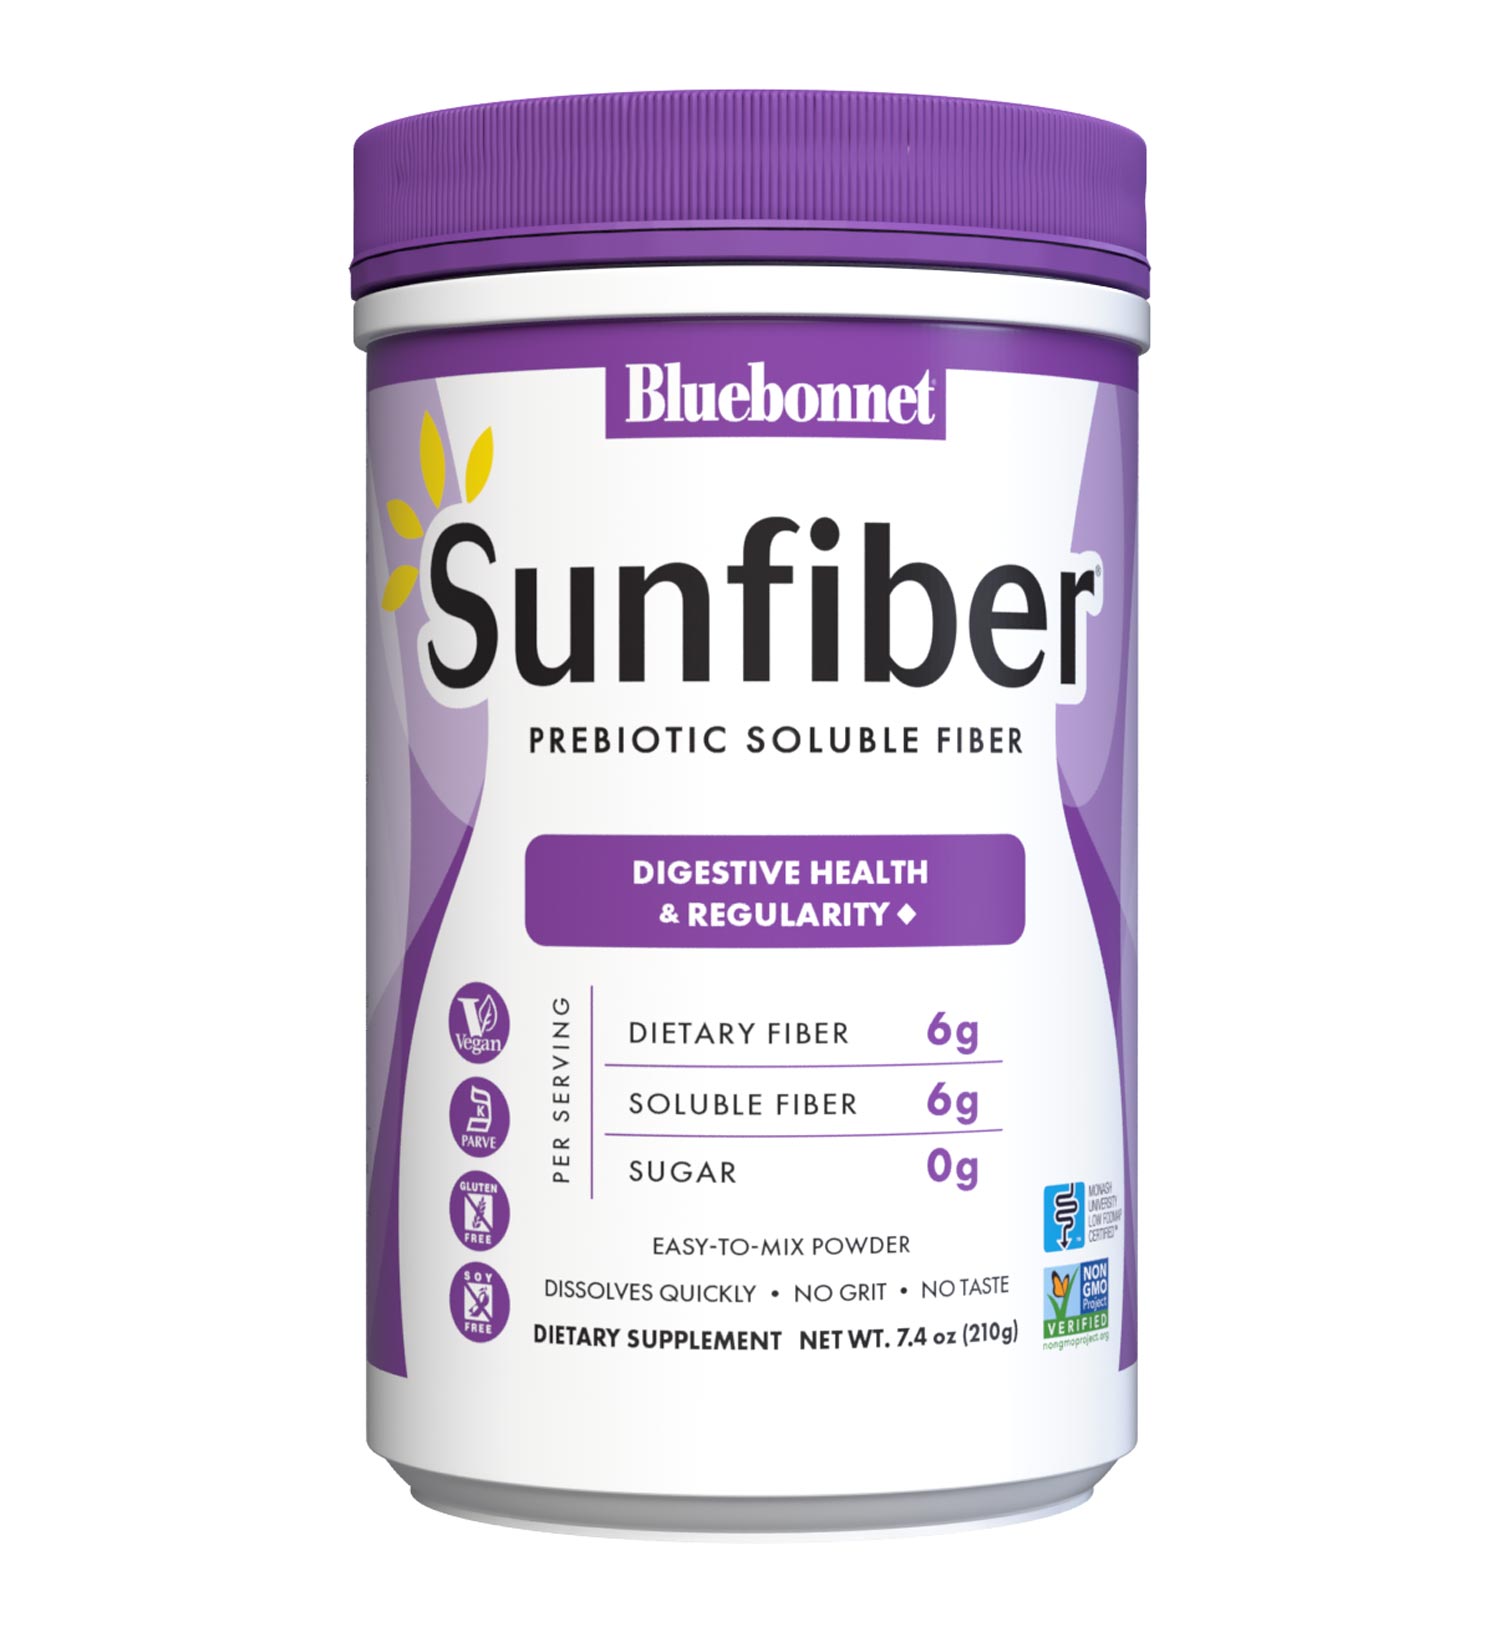 Bluebonnet’s Sunfiber® Powder delivers plant-based dietary fiber from partially hydrolyzed guar gum to help support bowel regularity while also providing prebiotic benefits for gastrointestinal health. This soluble and slow-fermenting fiber is well tolerated and suitable for those following a low-FODMAP diet. #size_7.4 oz